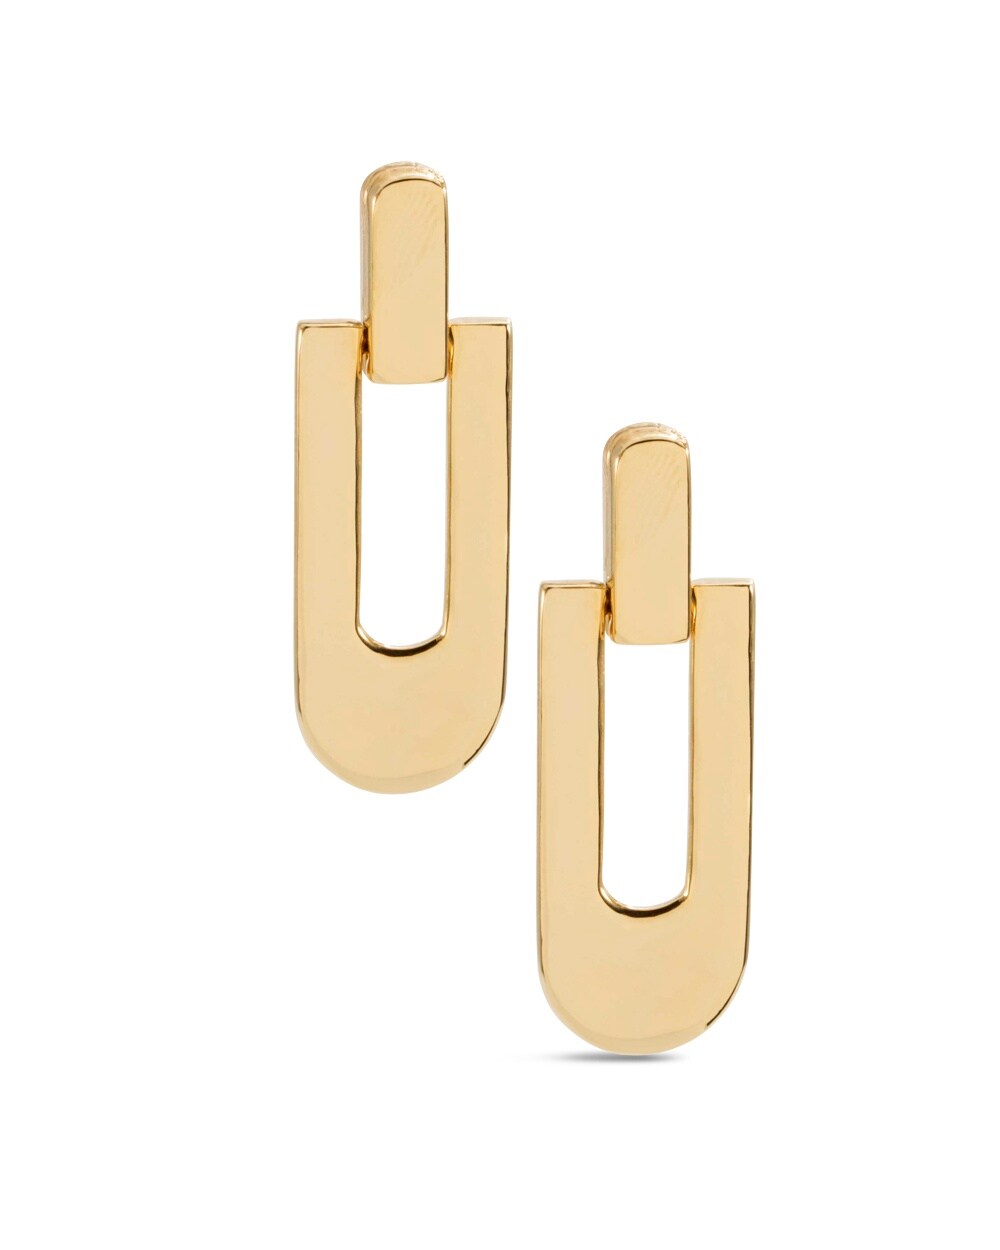 Tyra Architectural Drop Earrings